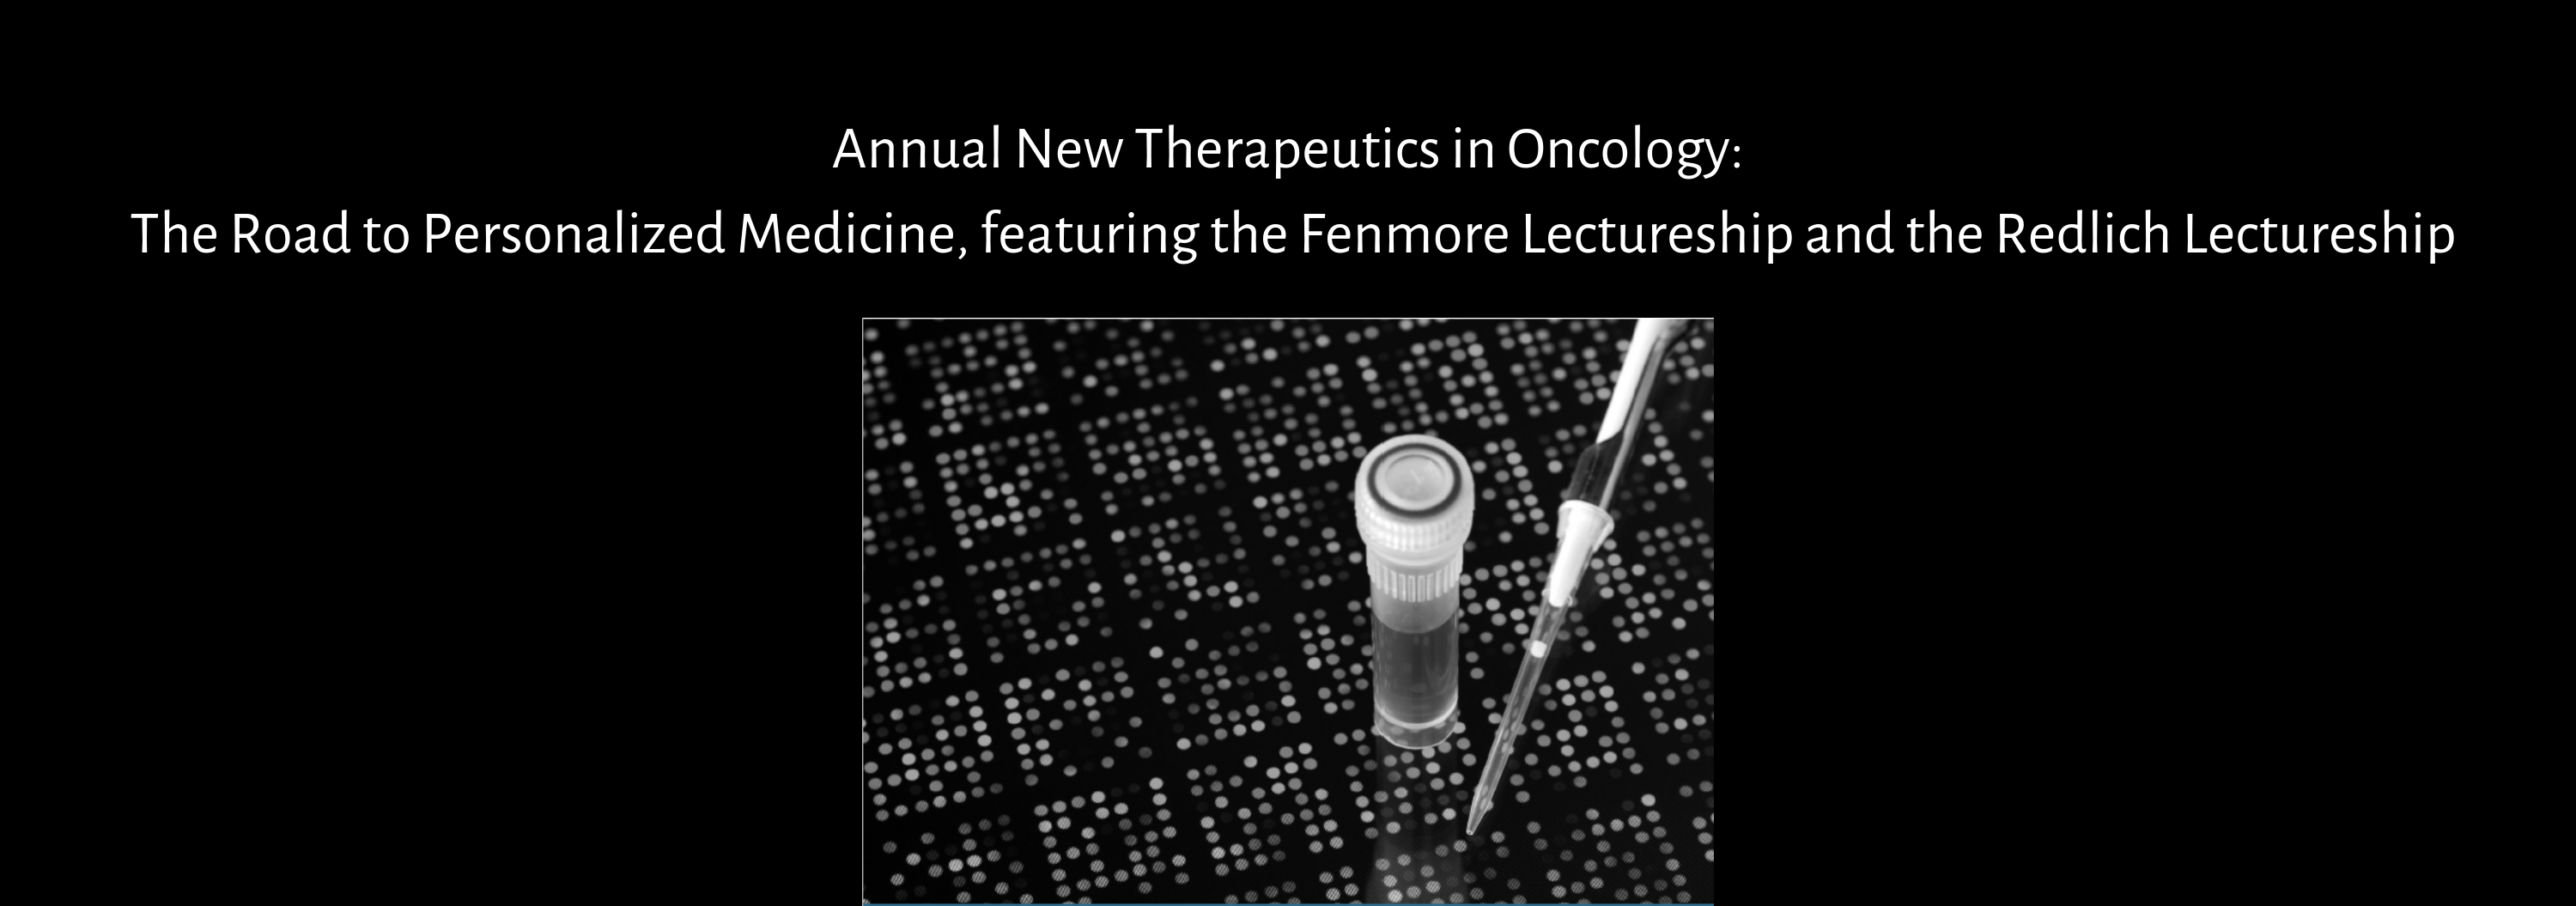 8th Annual New Therapeutics in Oncology: The Road to Personalized Medicine, featuring the Fenmore Lectureship and the Redlich Lectureship Banner